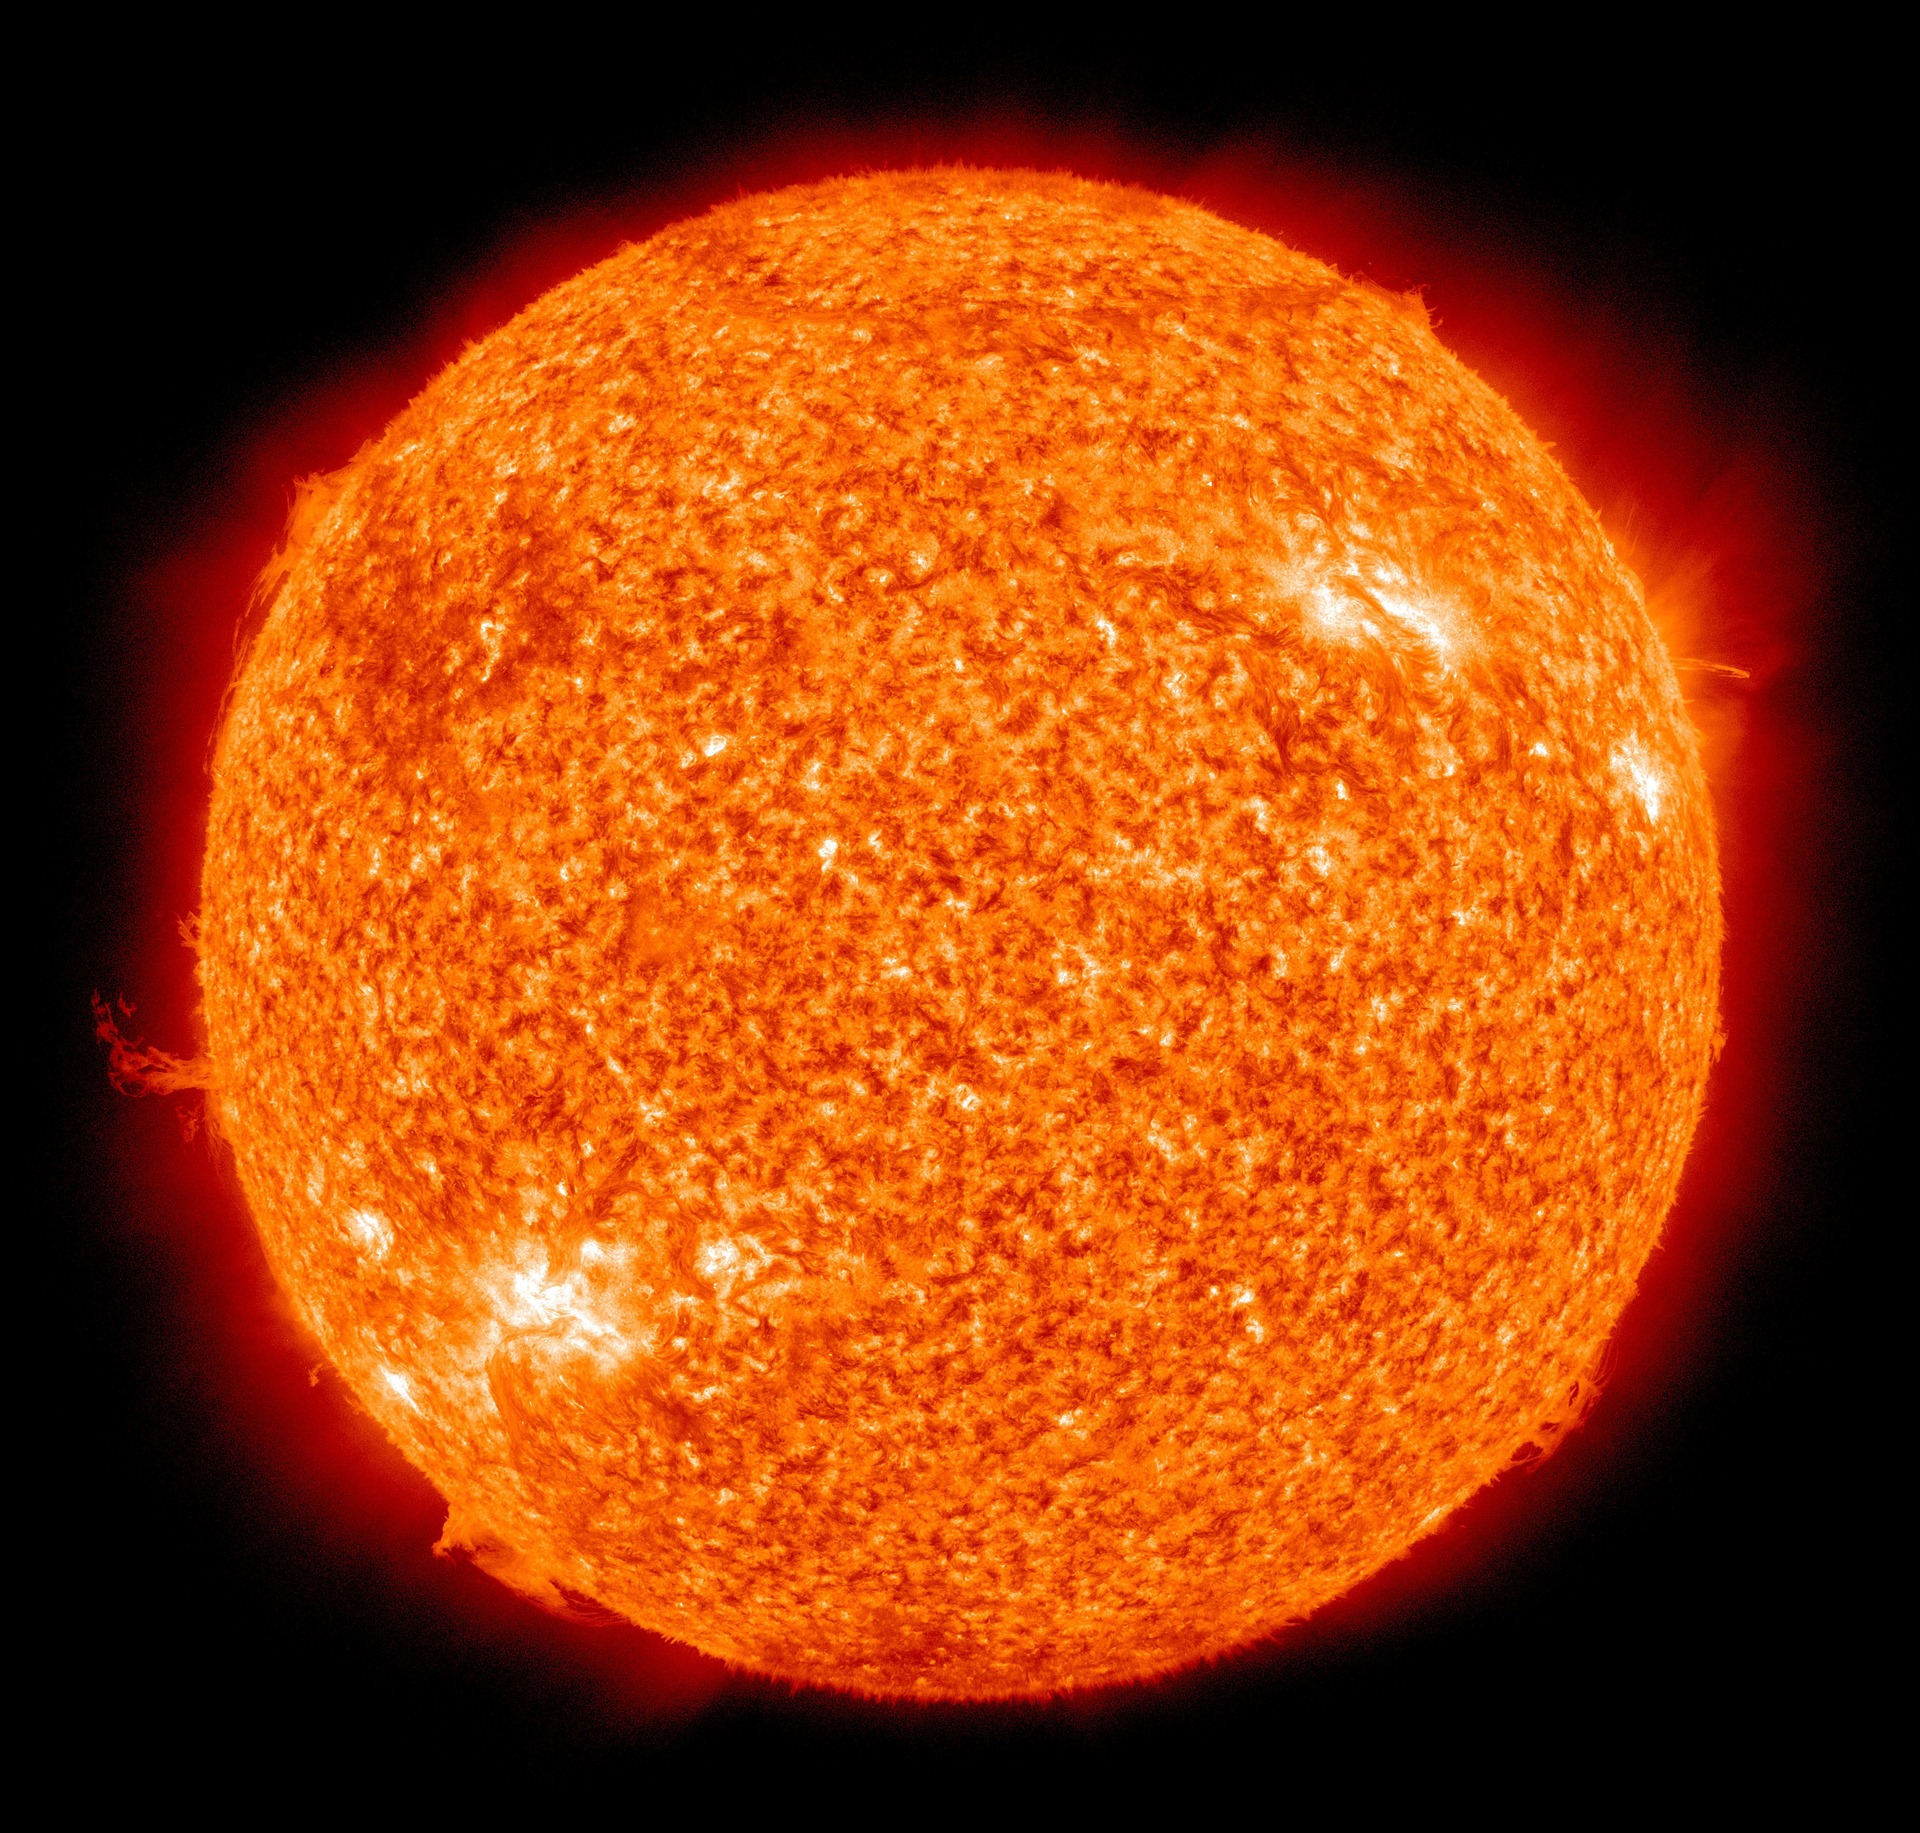 False-color image of the Sun observed in the extreme ultraviolet region of the spectrum